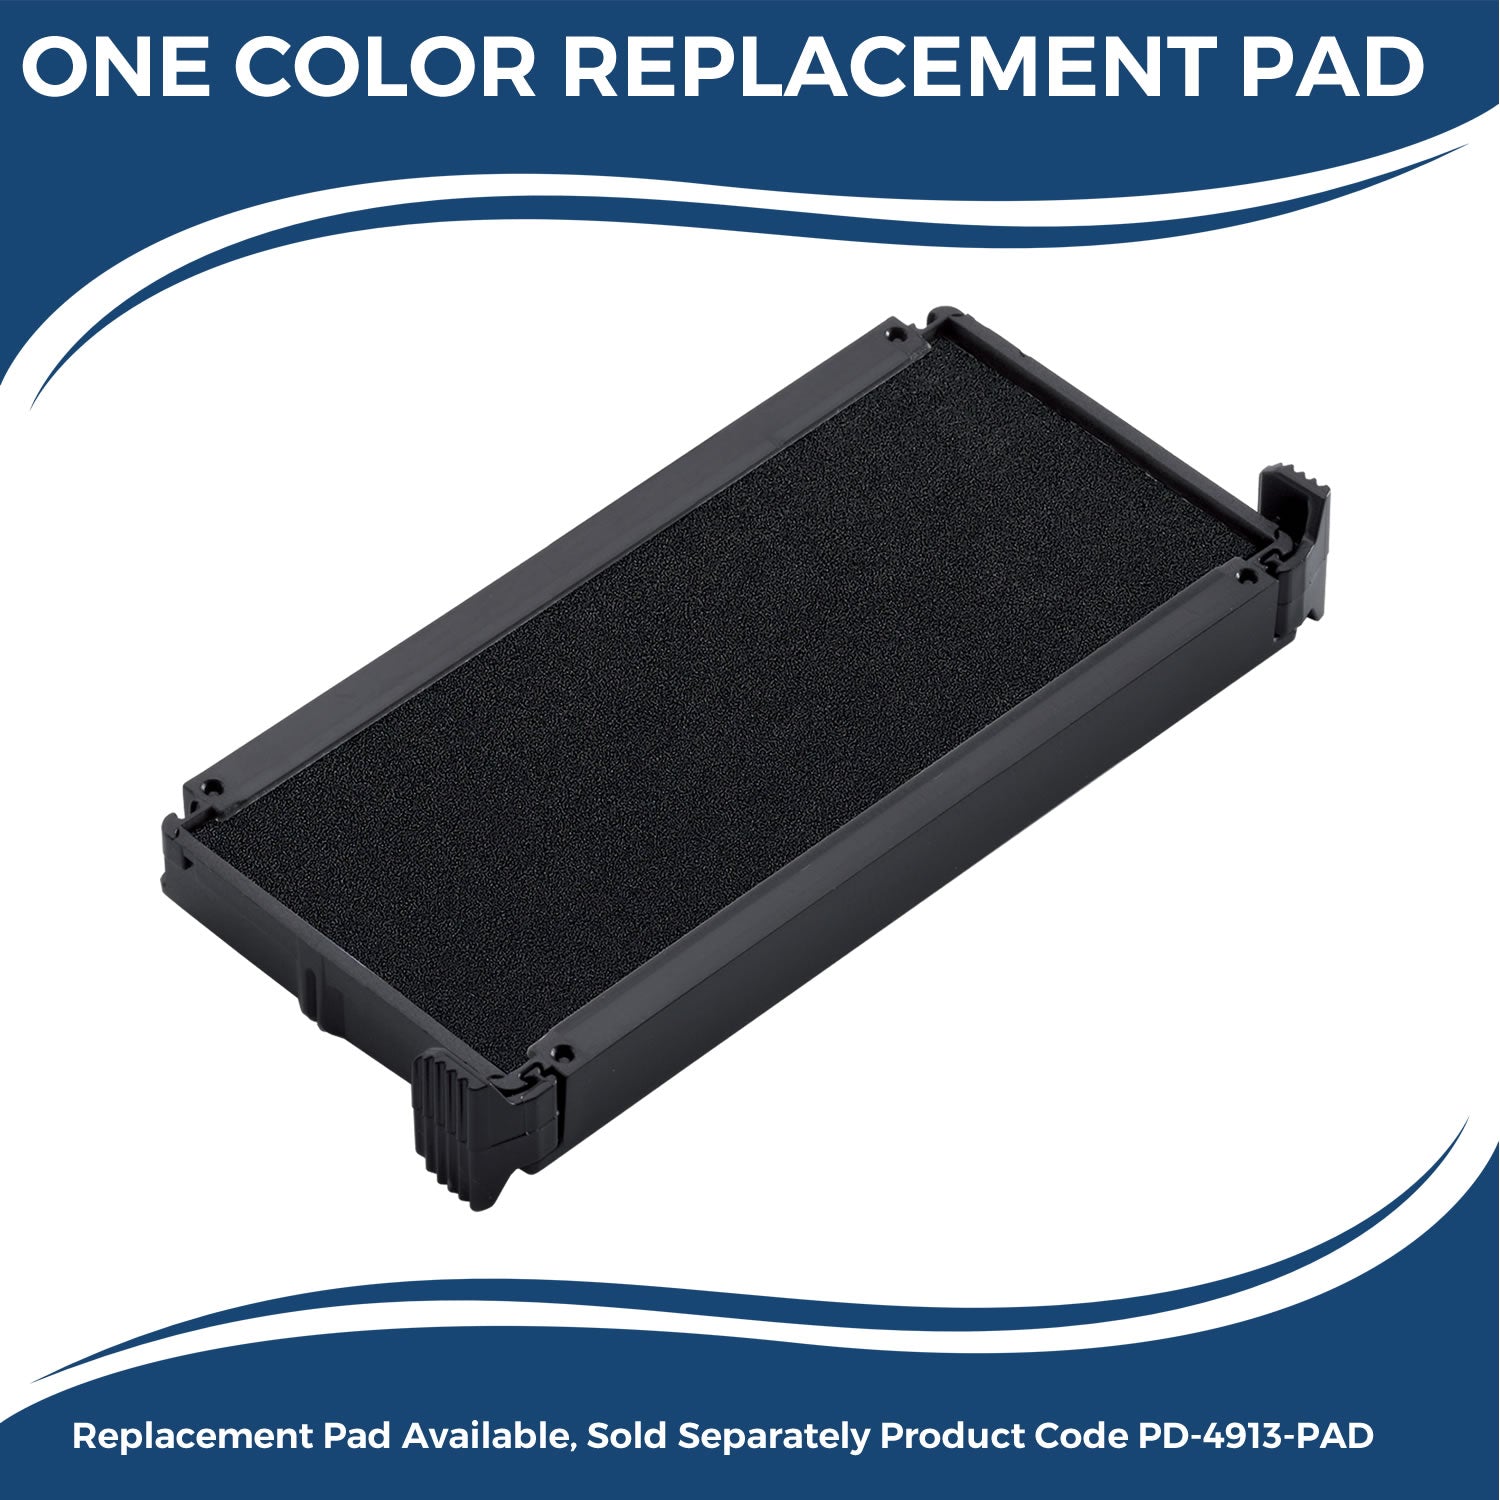 Large Self Inking Media Center Stamp 4653S Large Replacment Pad